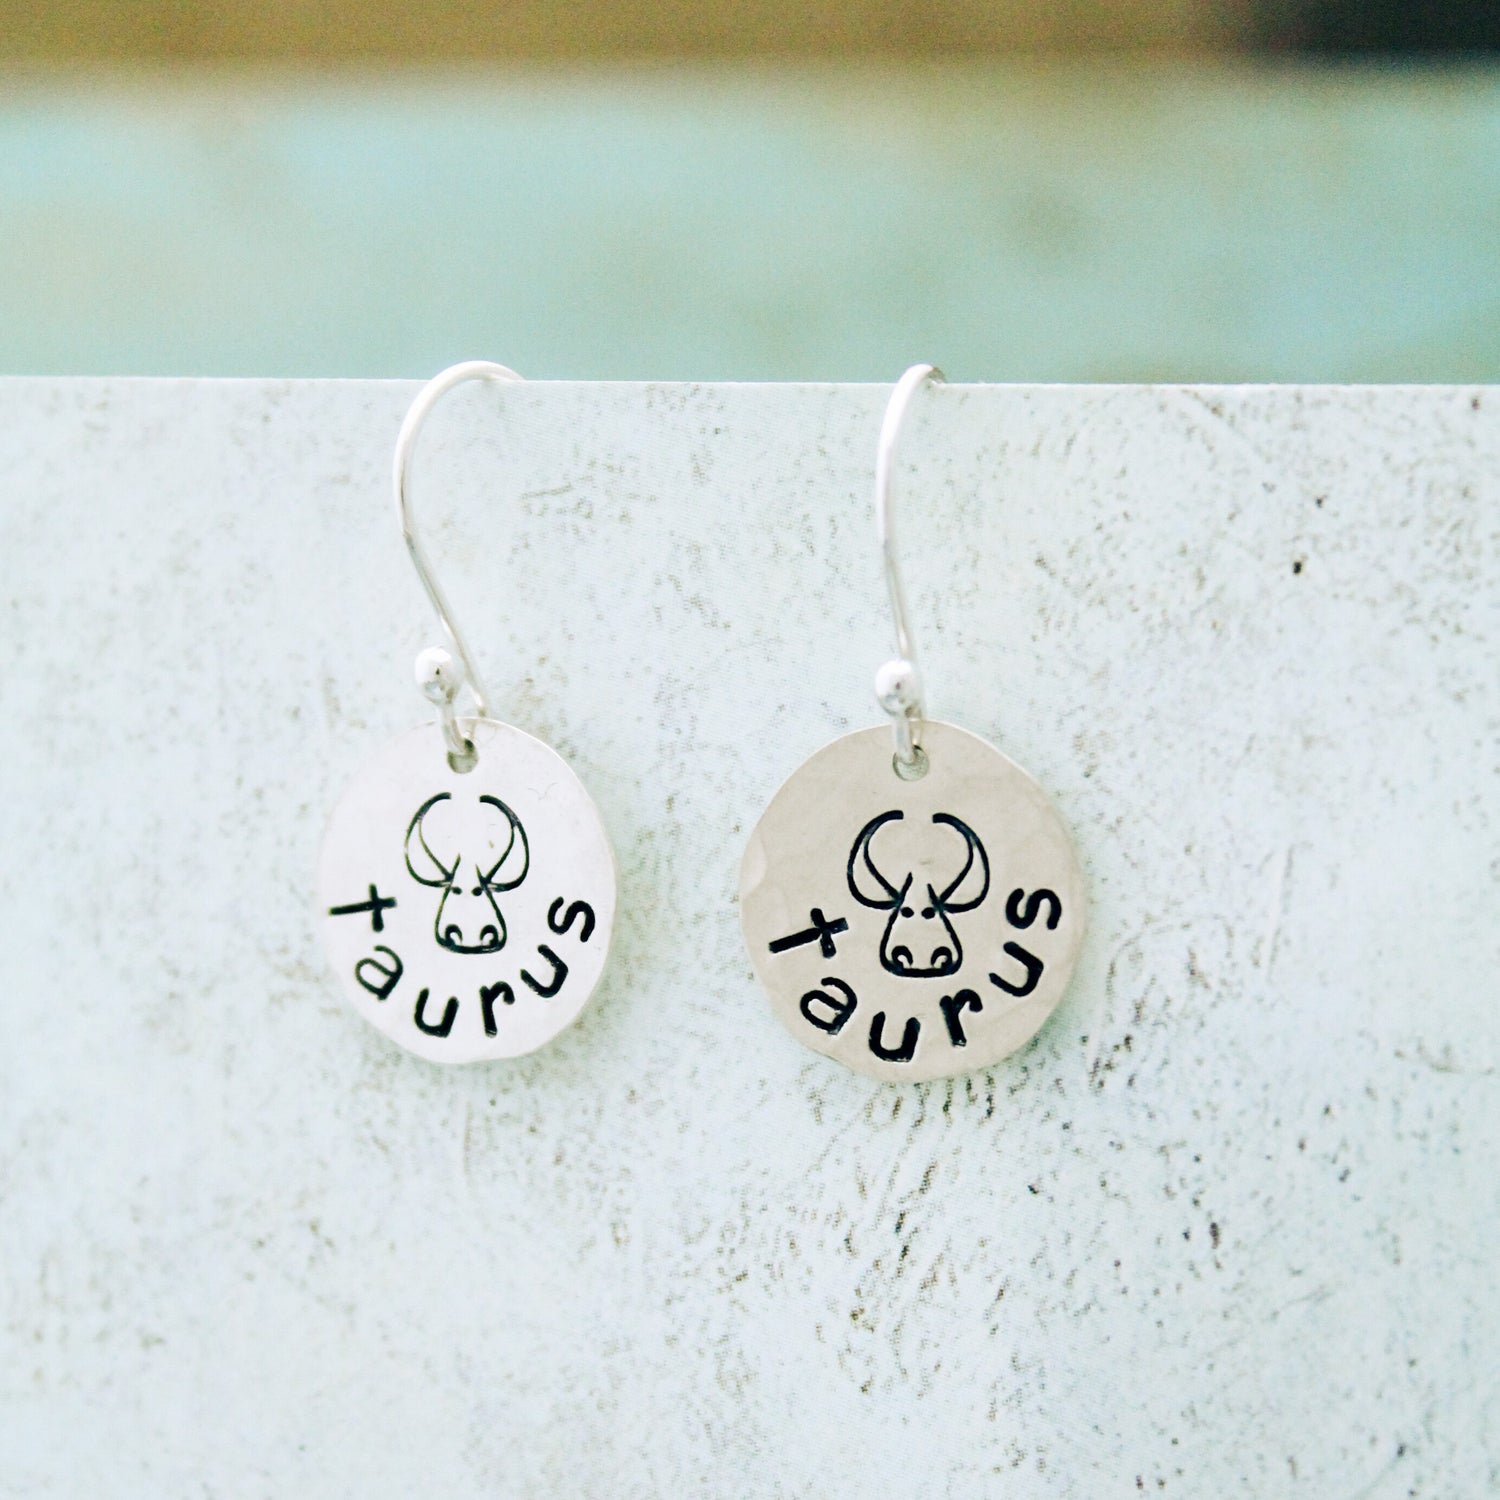 Taurus Sterling Silver Earrings, Taurus Zodiac Sign Jewelry, Hand Stamped Personalized Earrings, Taurus Zodiac Jewelry Unique Gift for Her